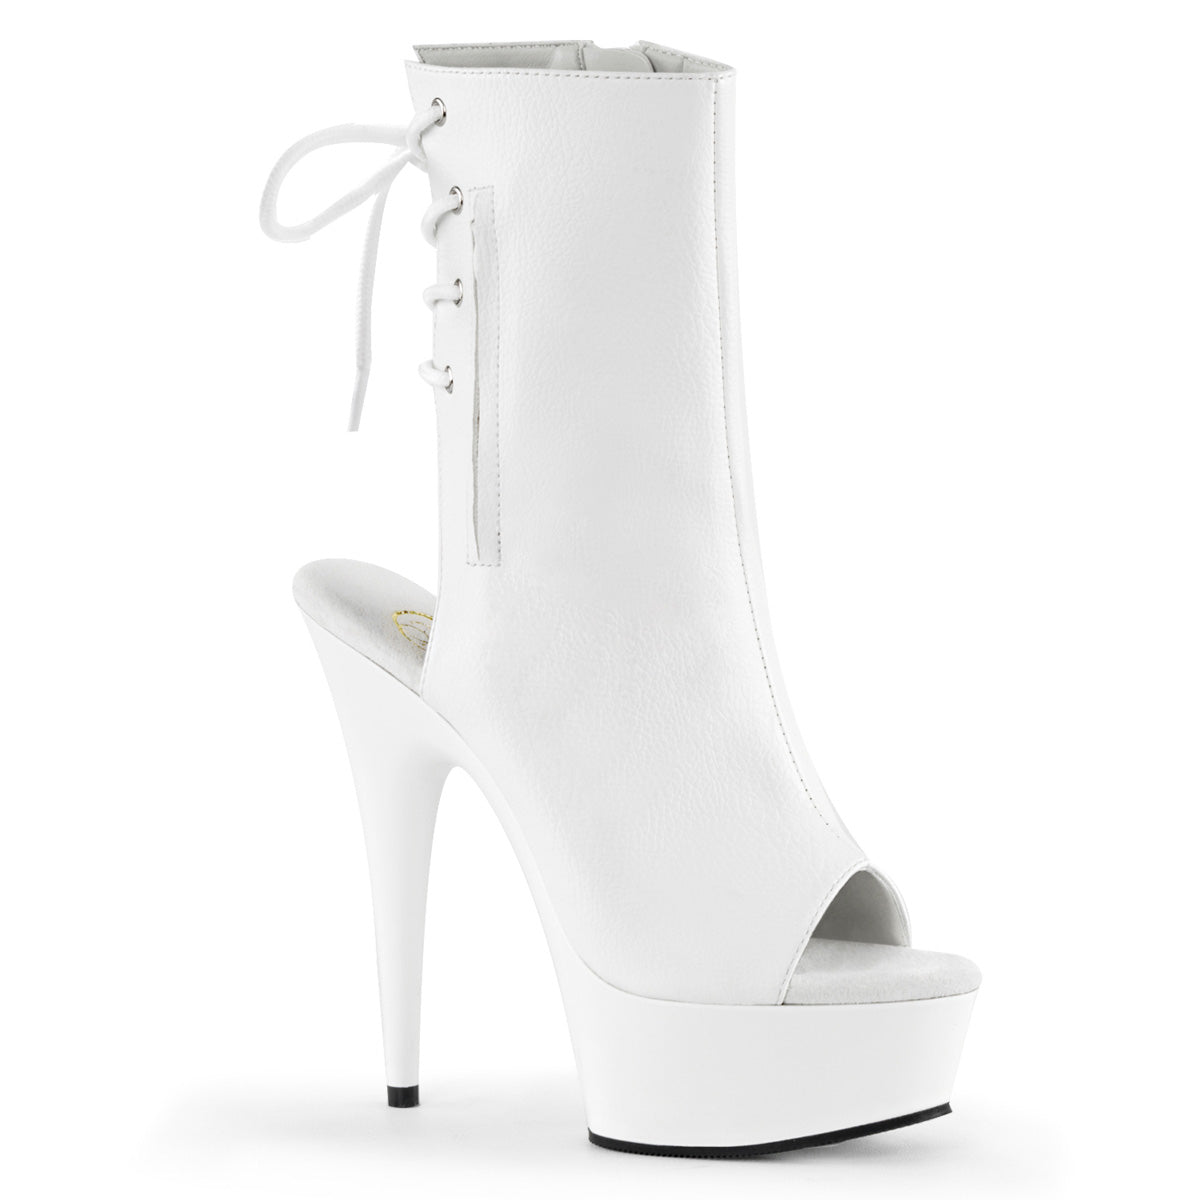 DELIGHT-1018 Pleasers 6 Inch Heel White Pole Dancer Platform Ankle Boots